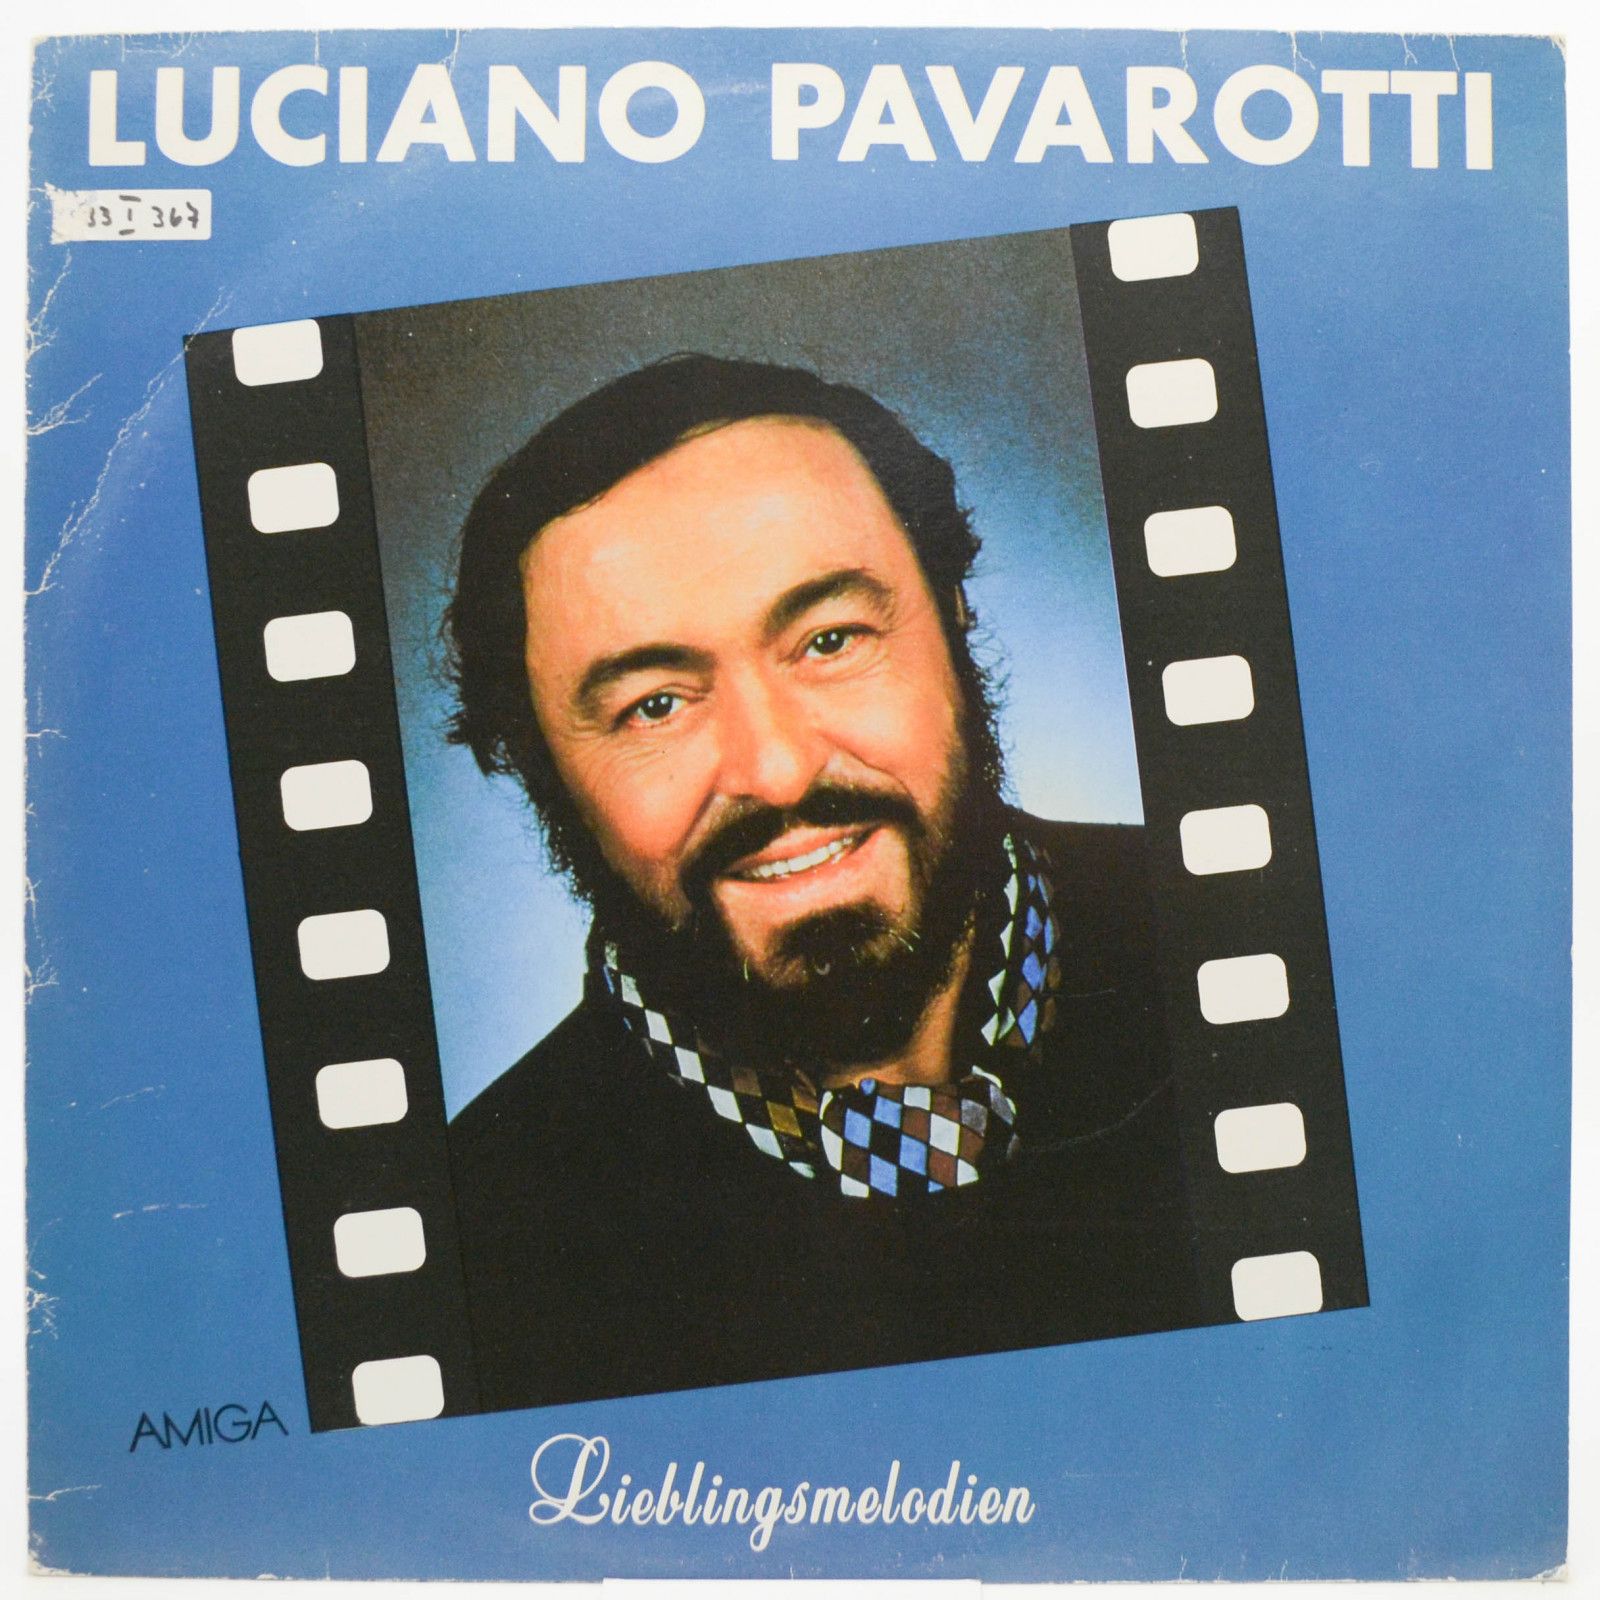 Luciano Pavarotti — Lieblingsmelodien, 1989